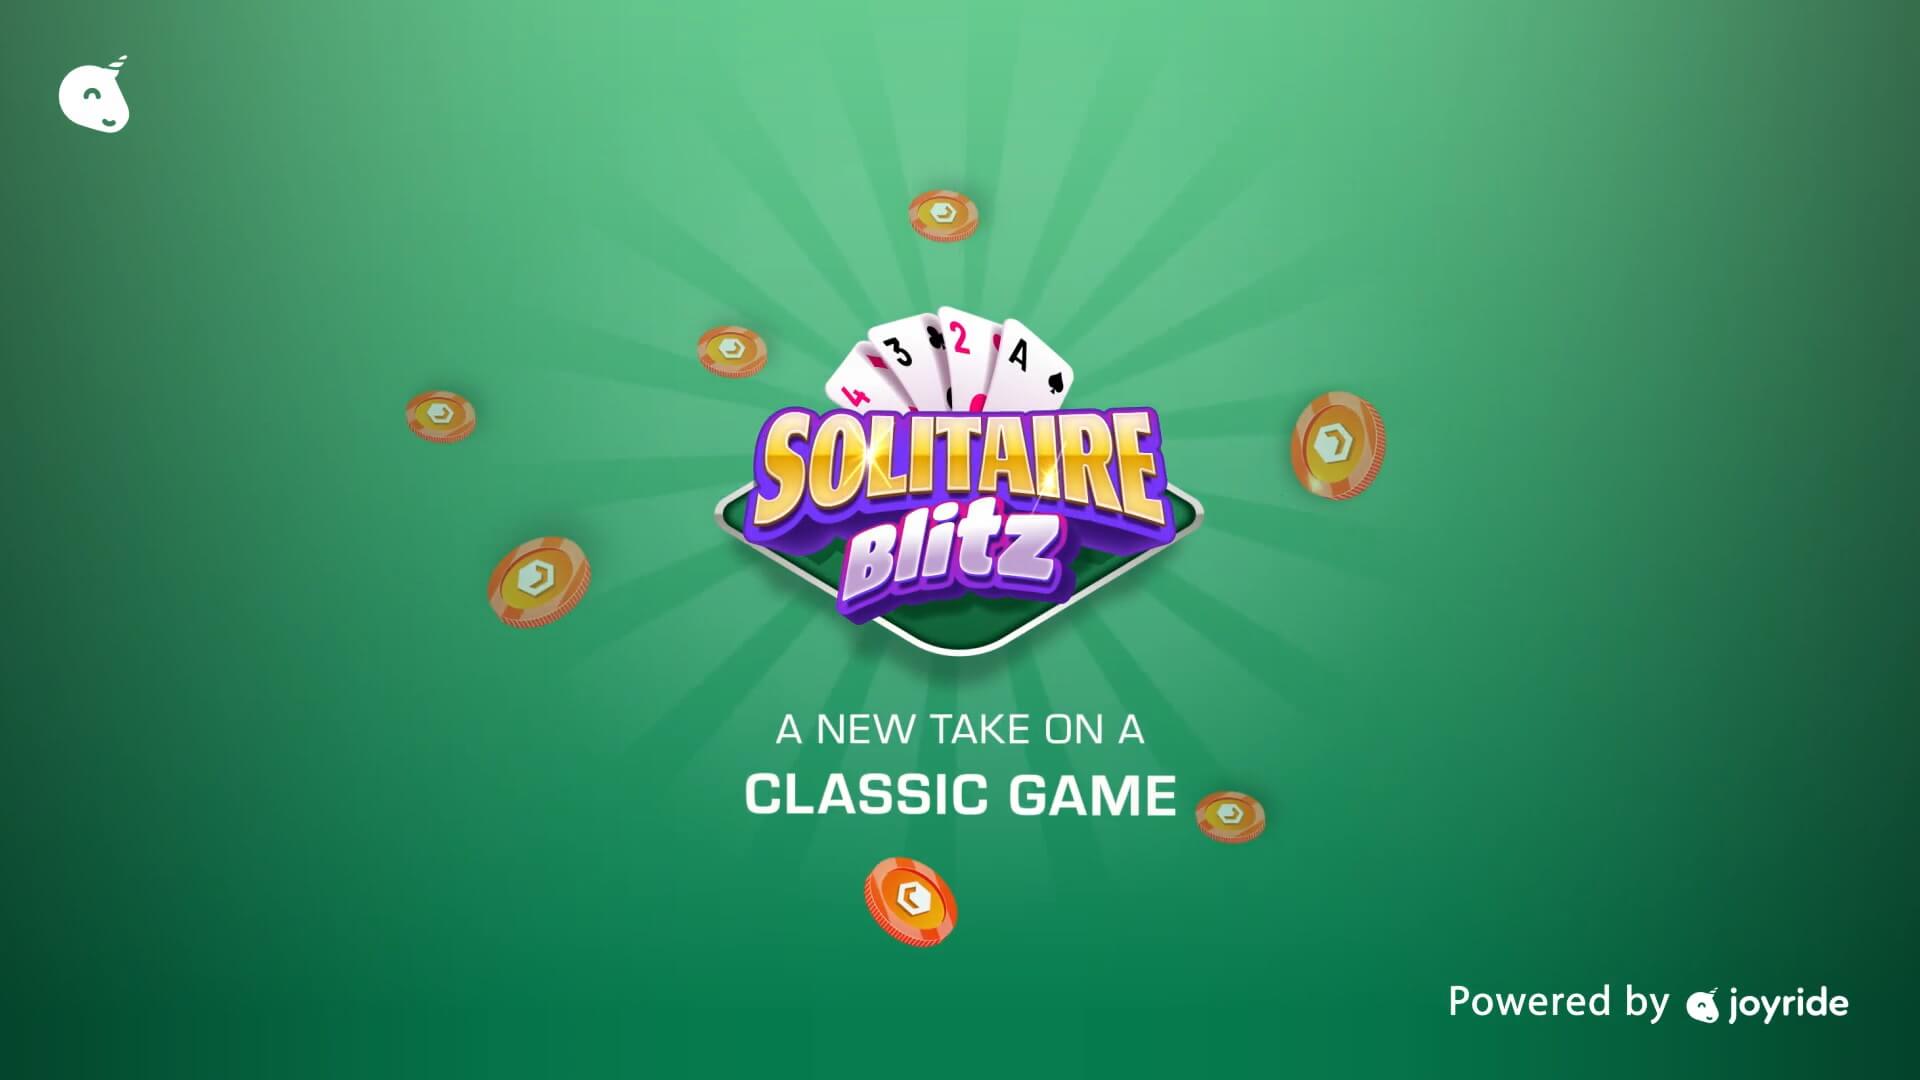 First look at Solitaire Blitz